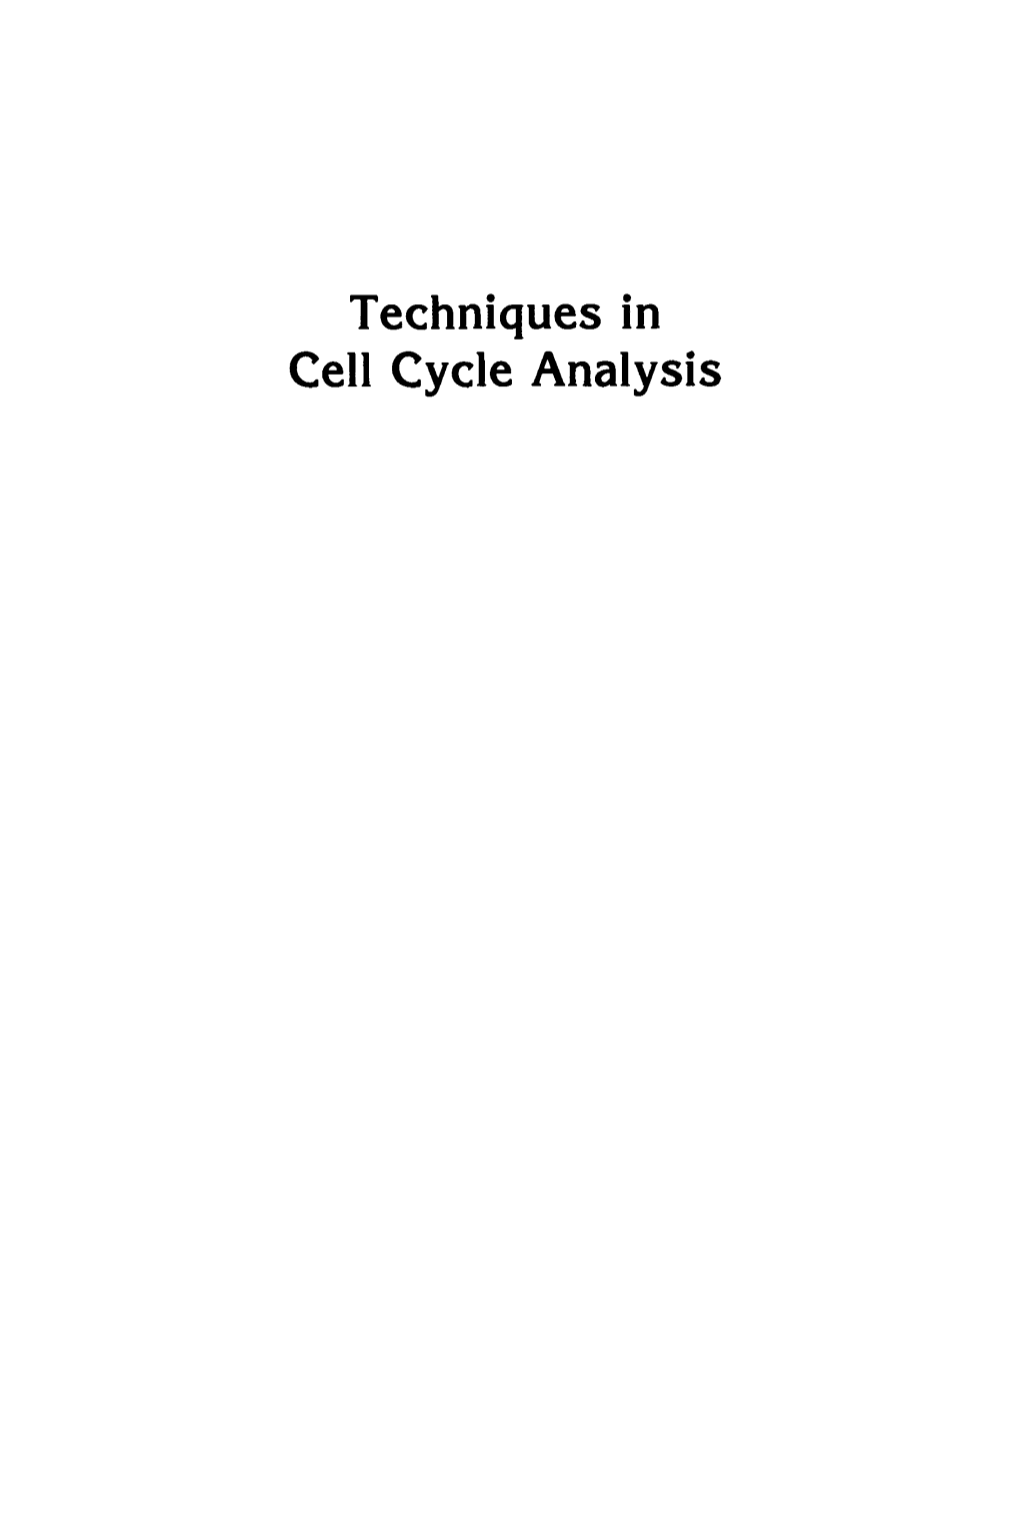 Techniques in Cell Cycle Analysis Biological Methods Techniques in Cell Cycle Analysis, Edited by Joe W